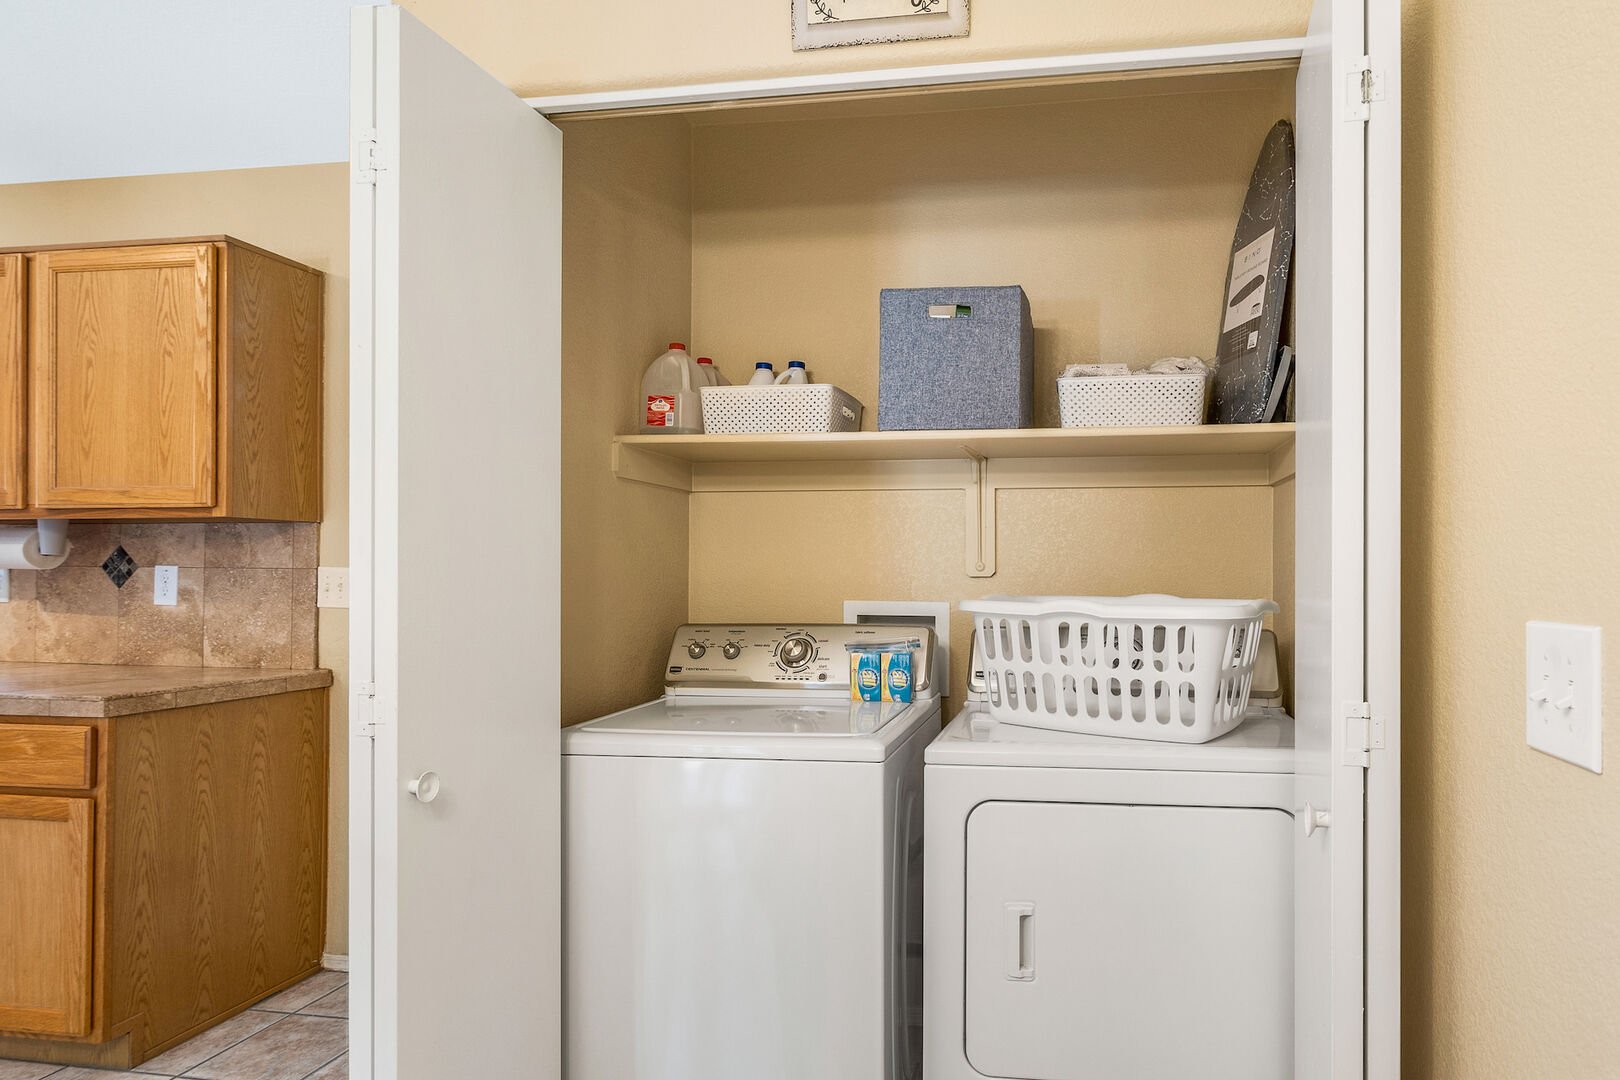 Full size washer and dryer in closet near kitchen convenient for guests on both sides of the house